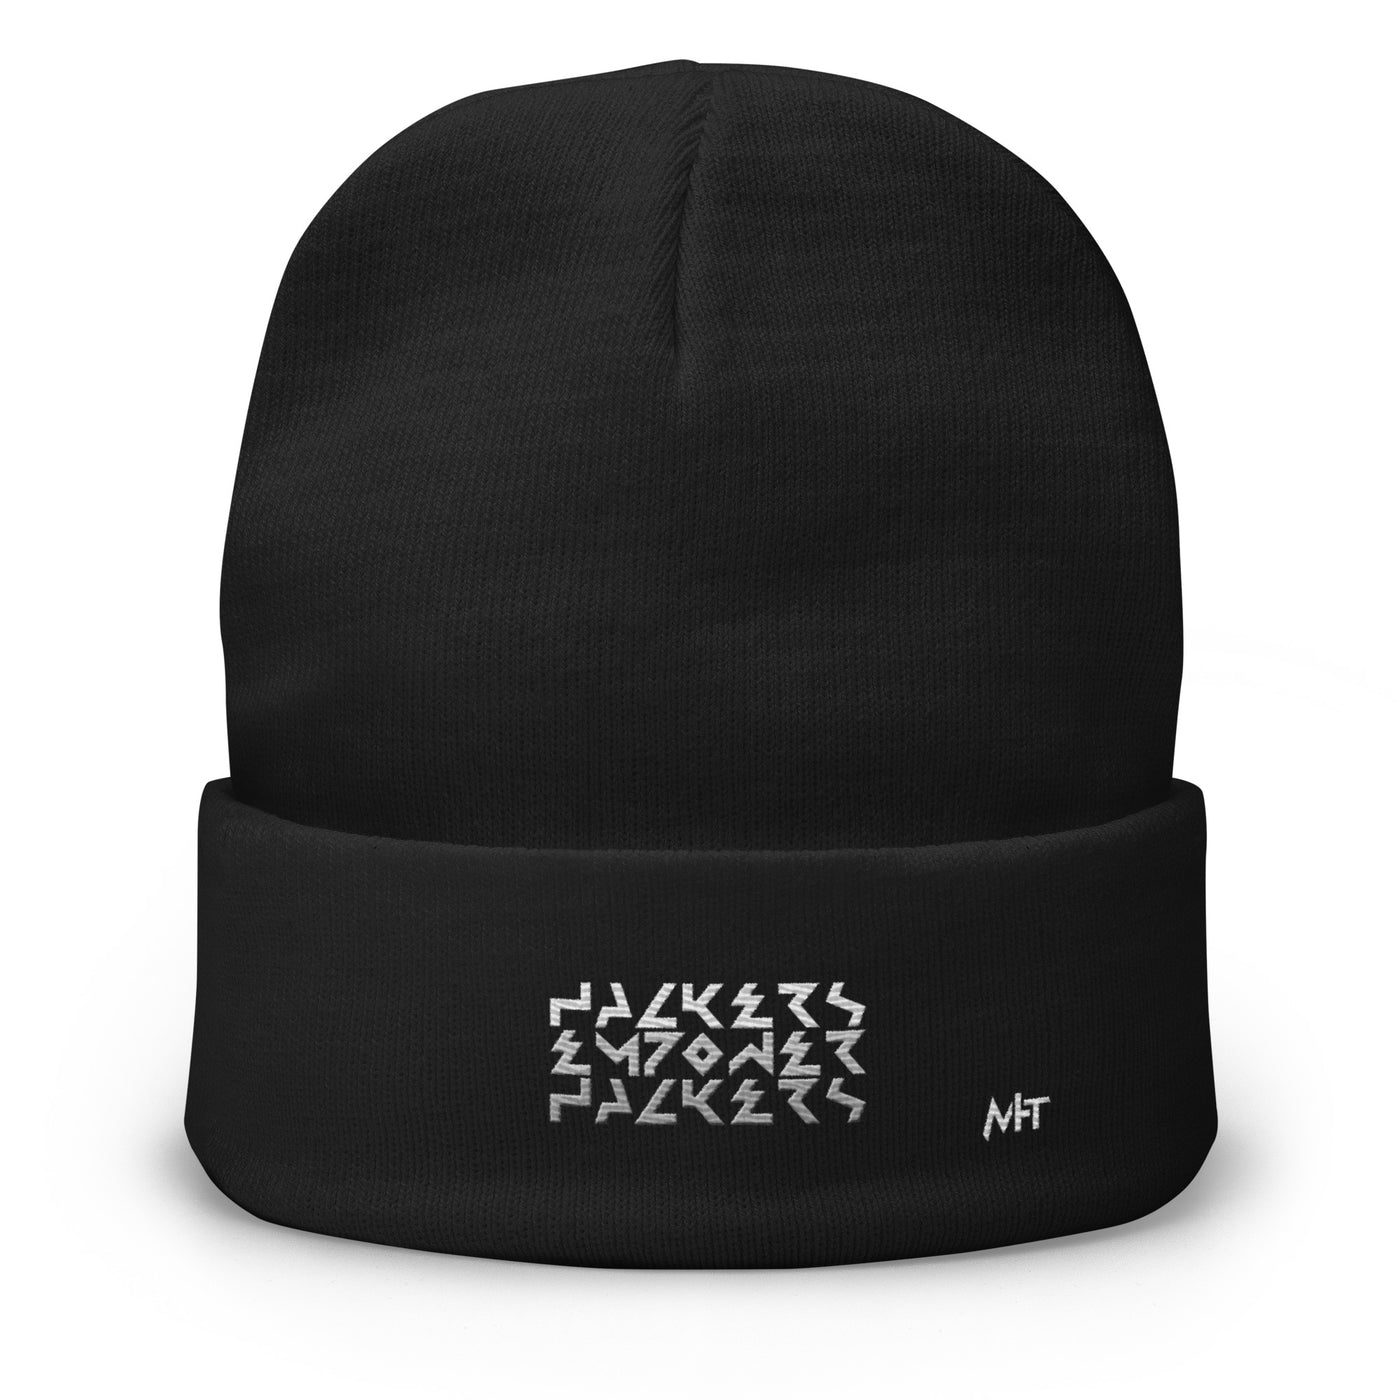 Hackers Empower Hackers V4 - Embroidered Beanie